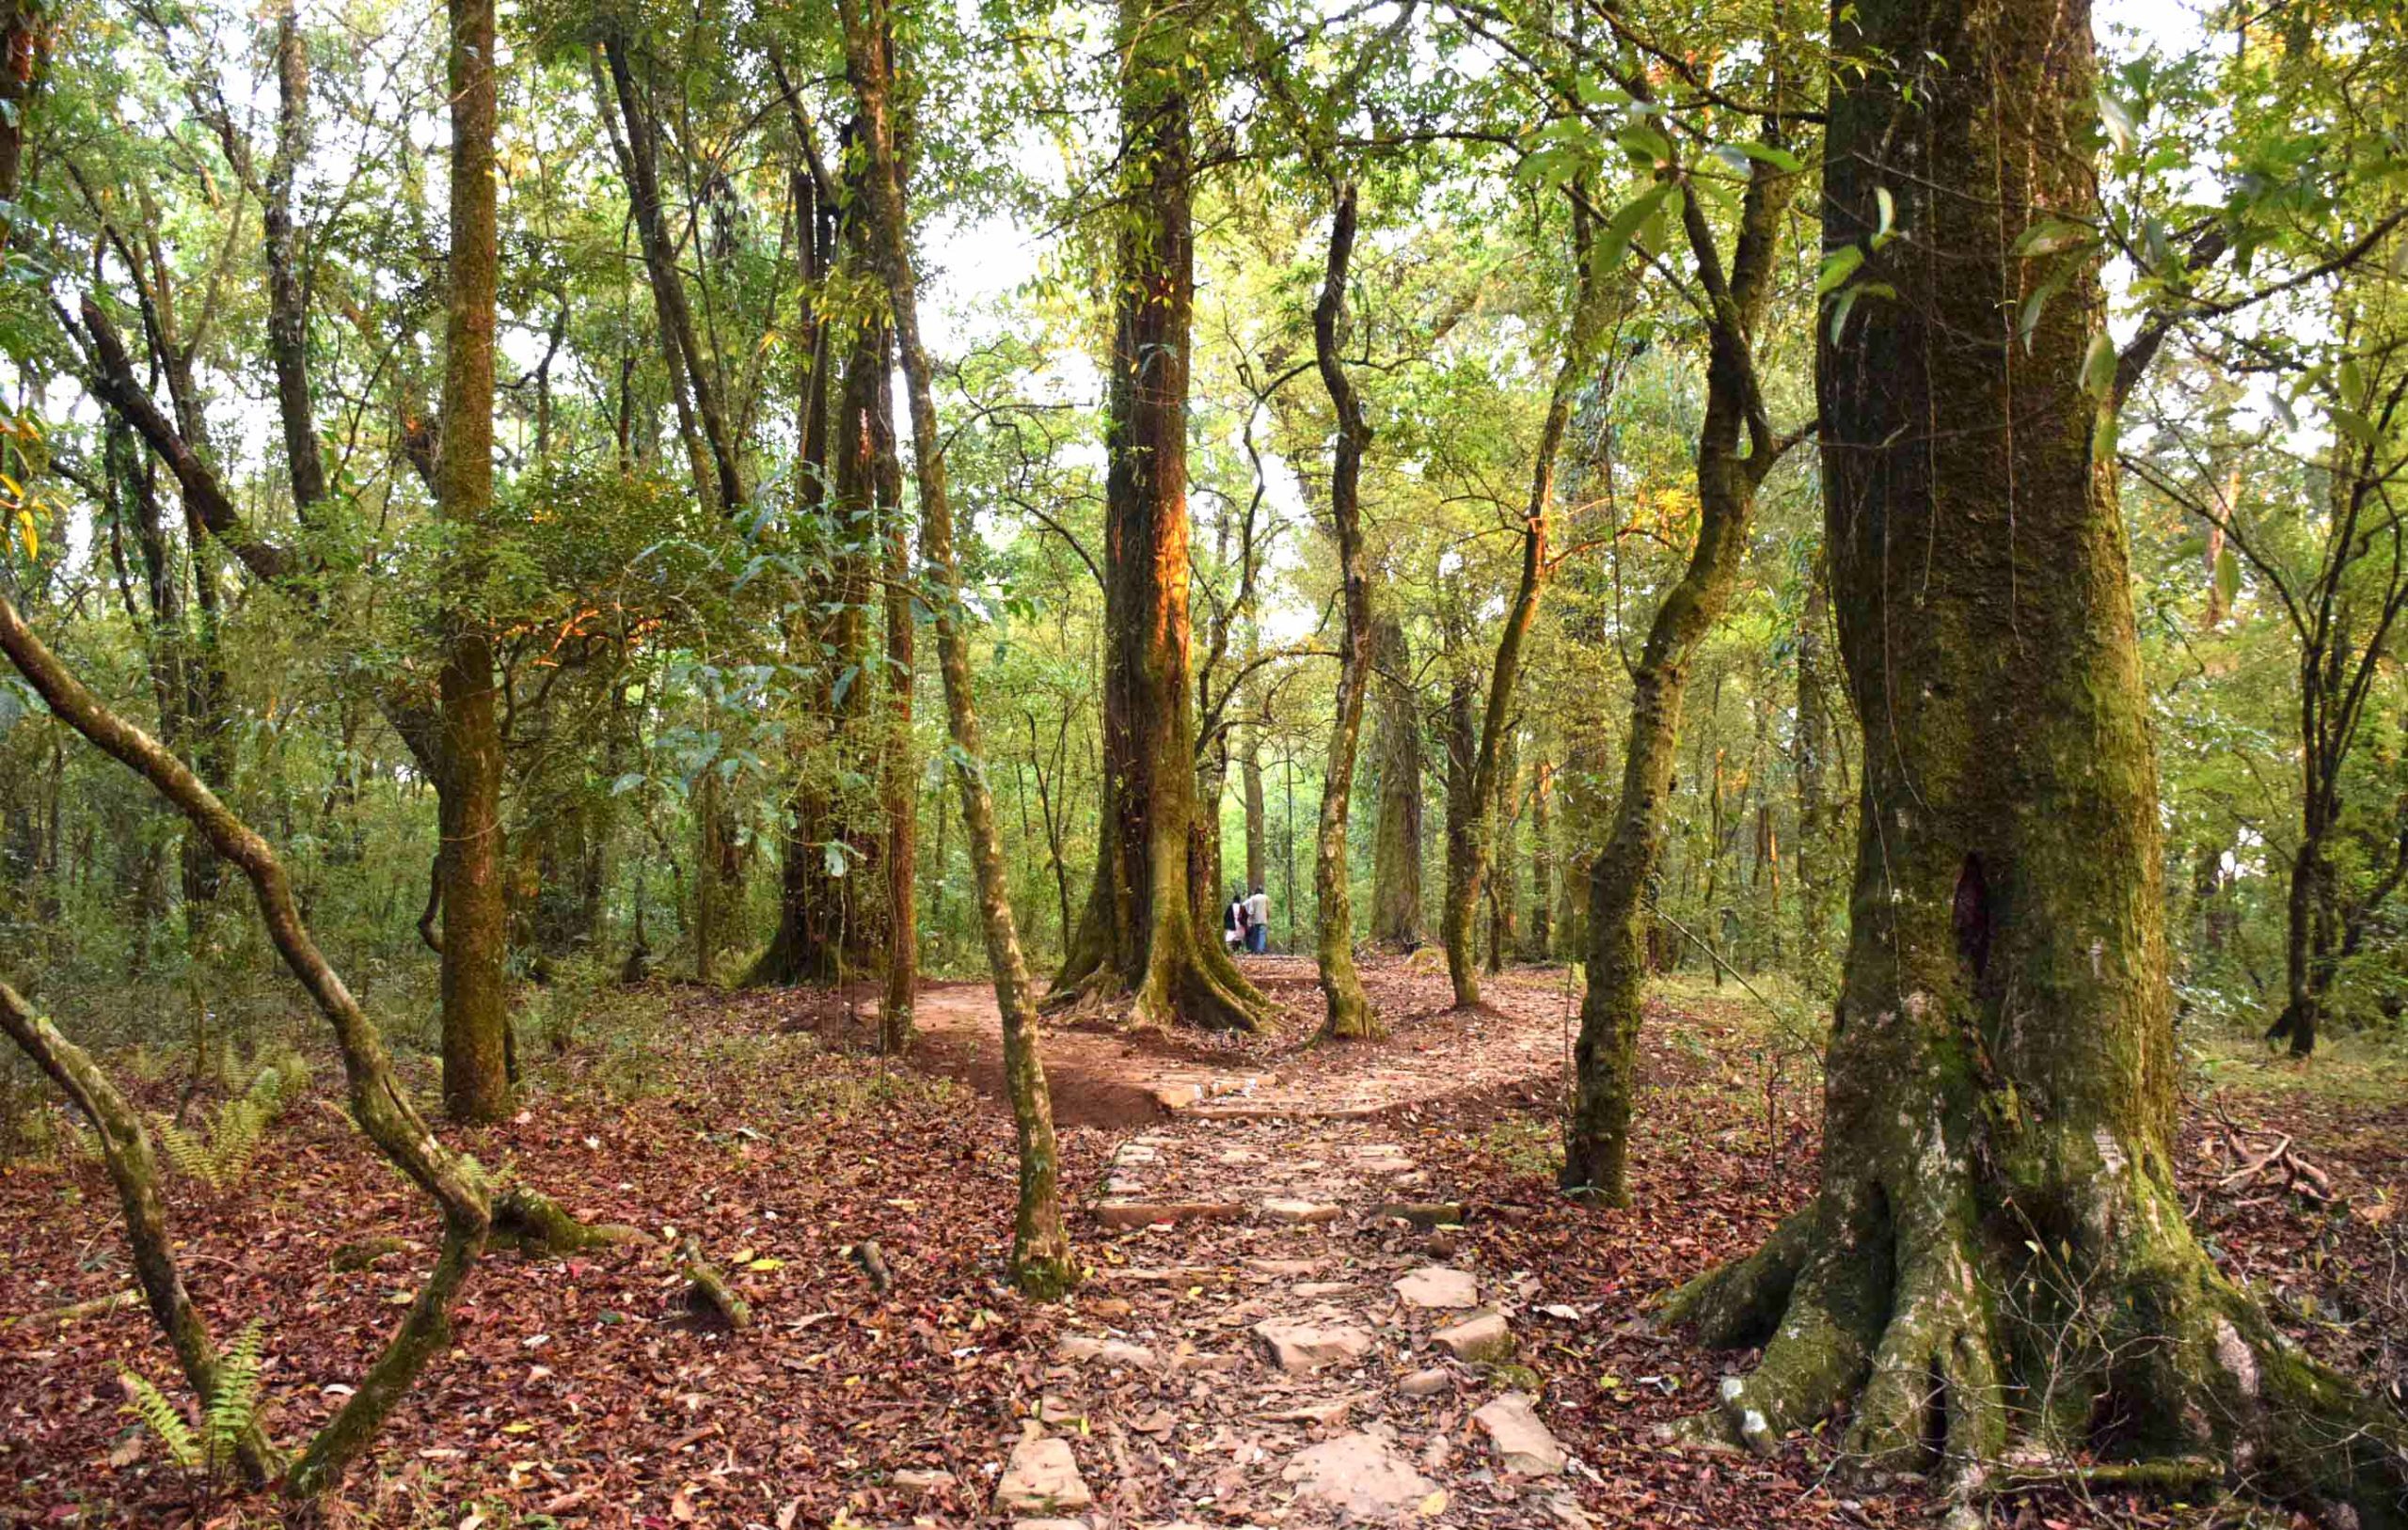 Mawphlang Sacred Grove at its pristine best as tourism stops The